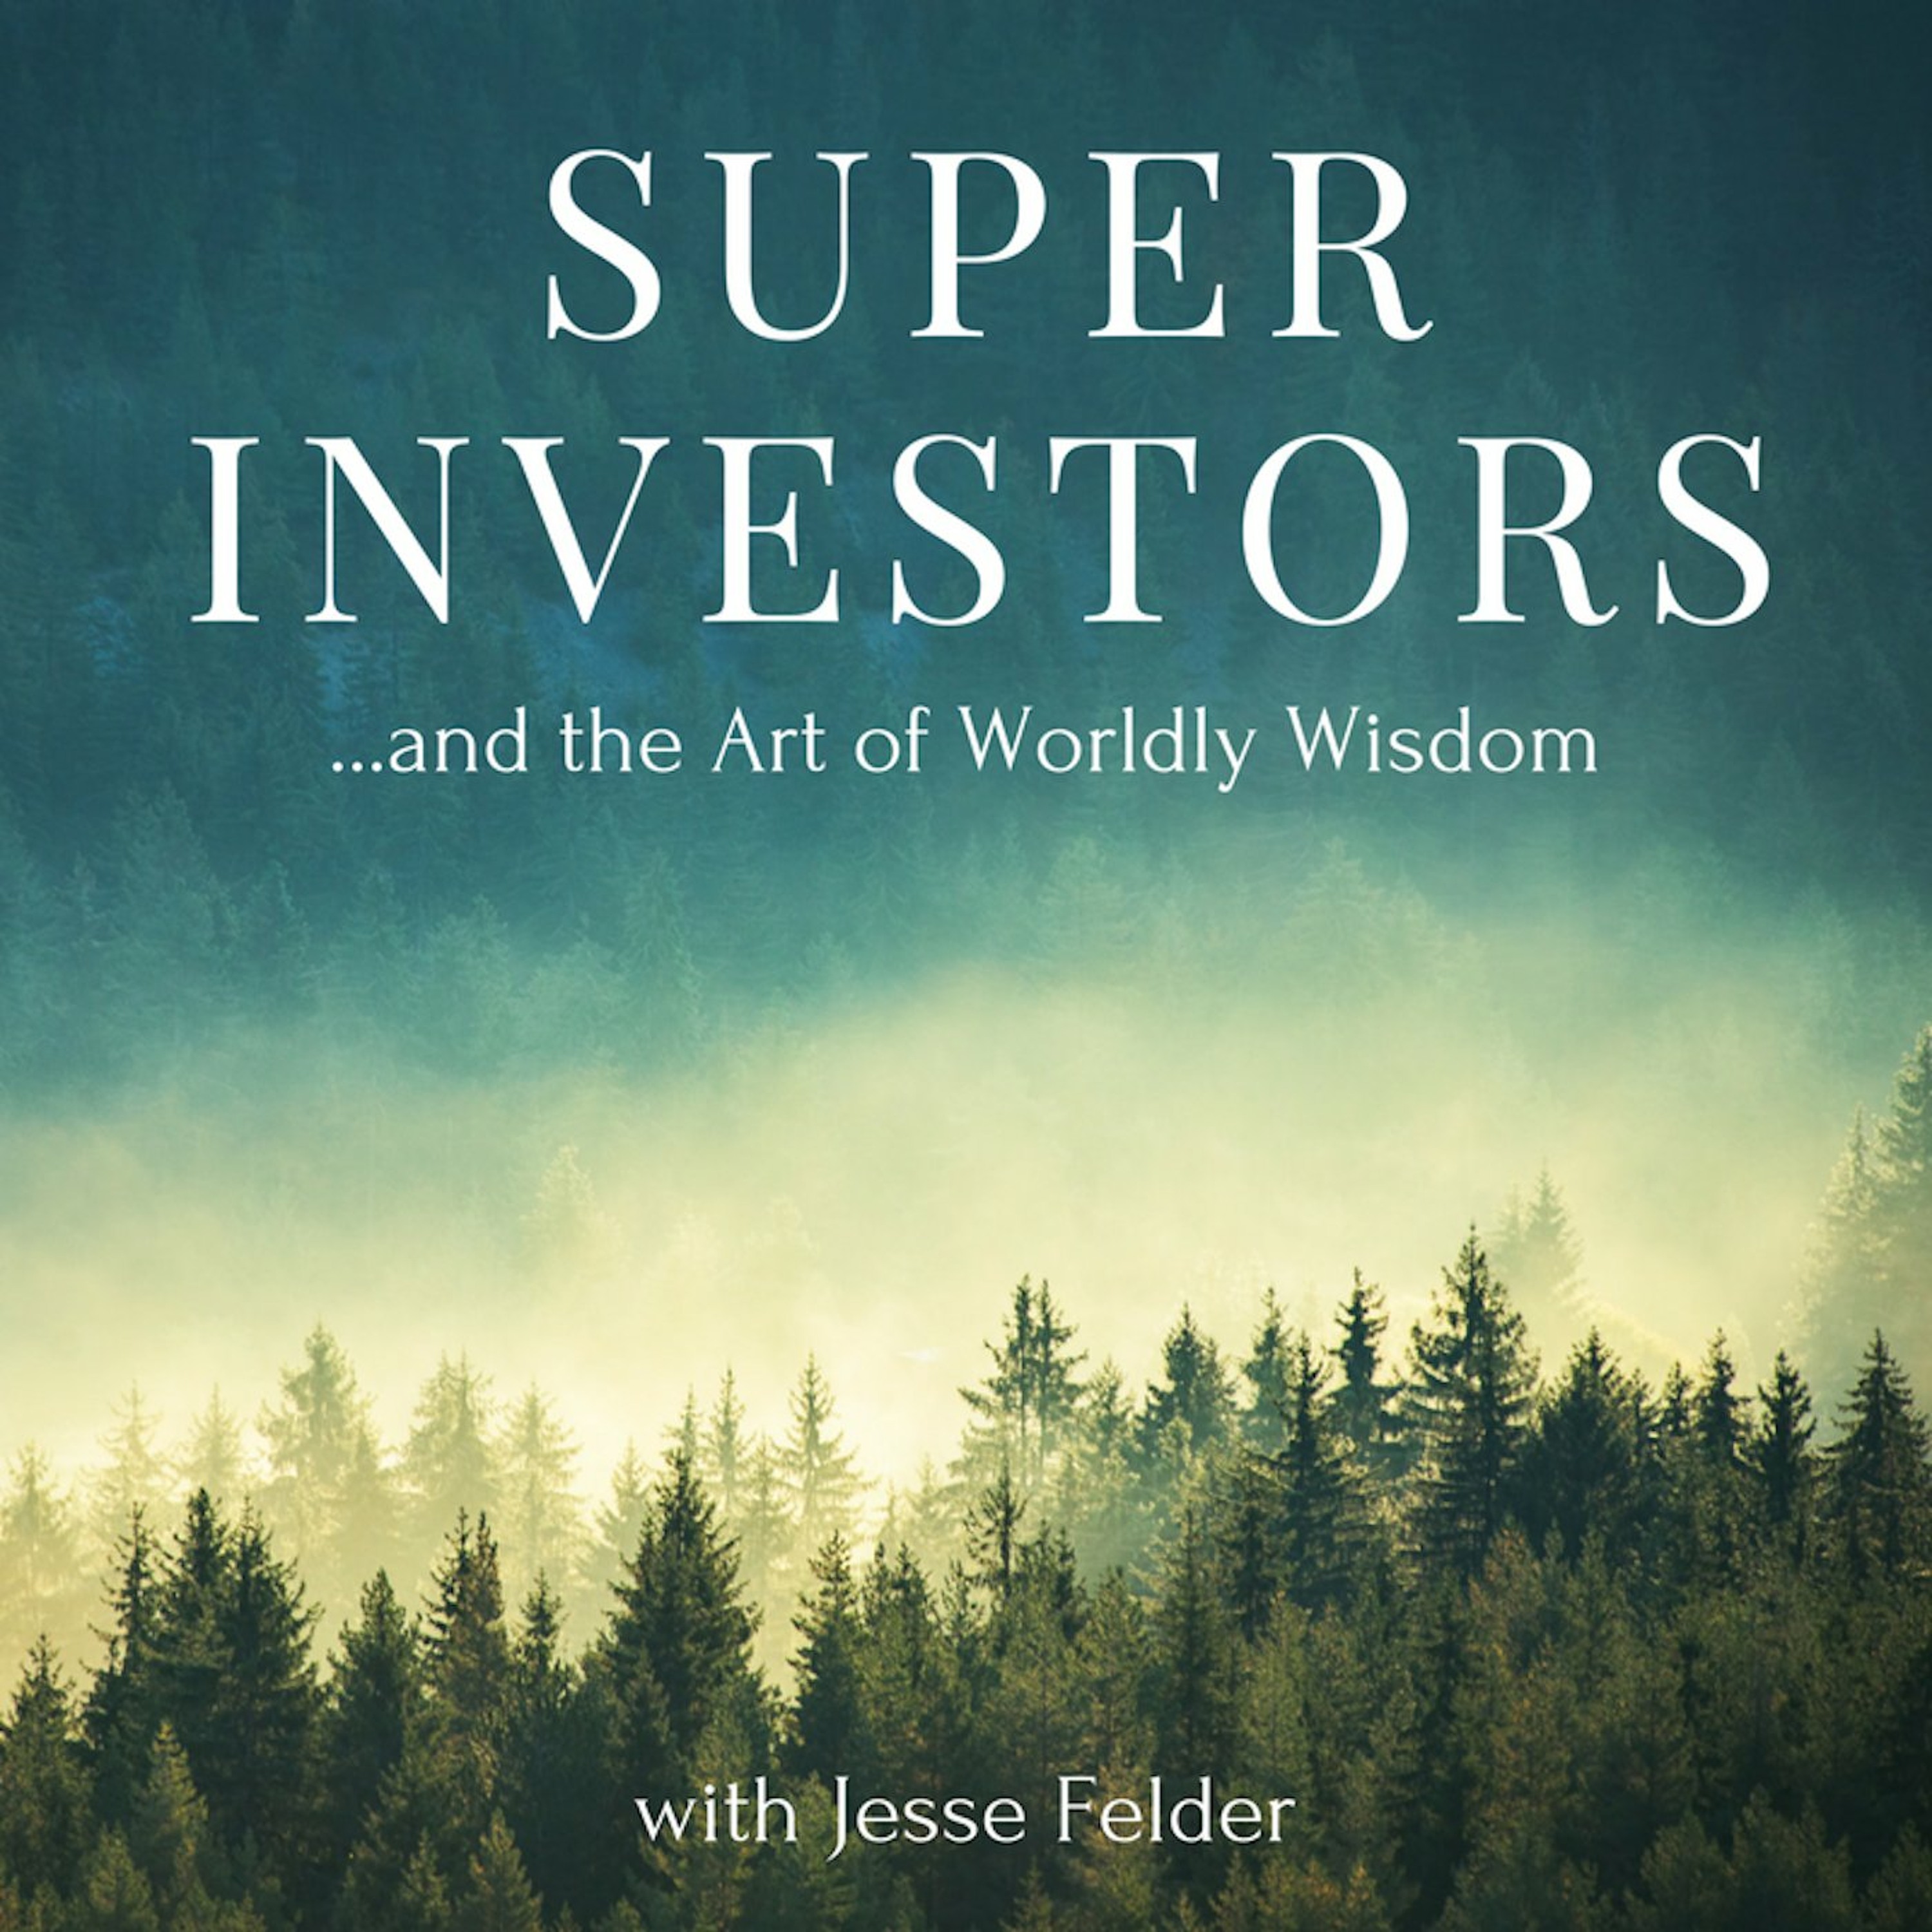 #2: Eric Cinnamond on the Value of Absolute Return Investing